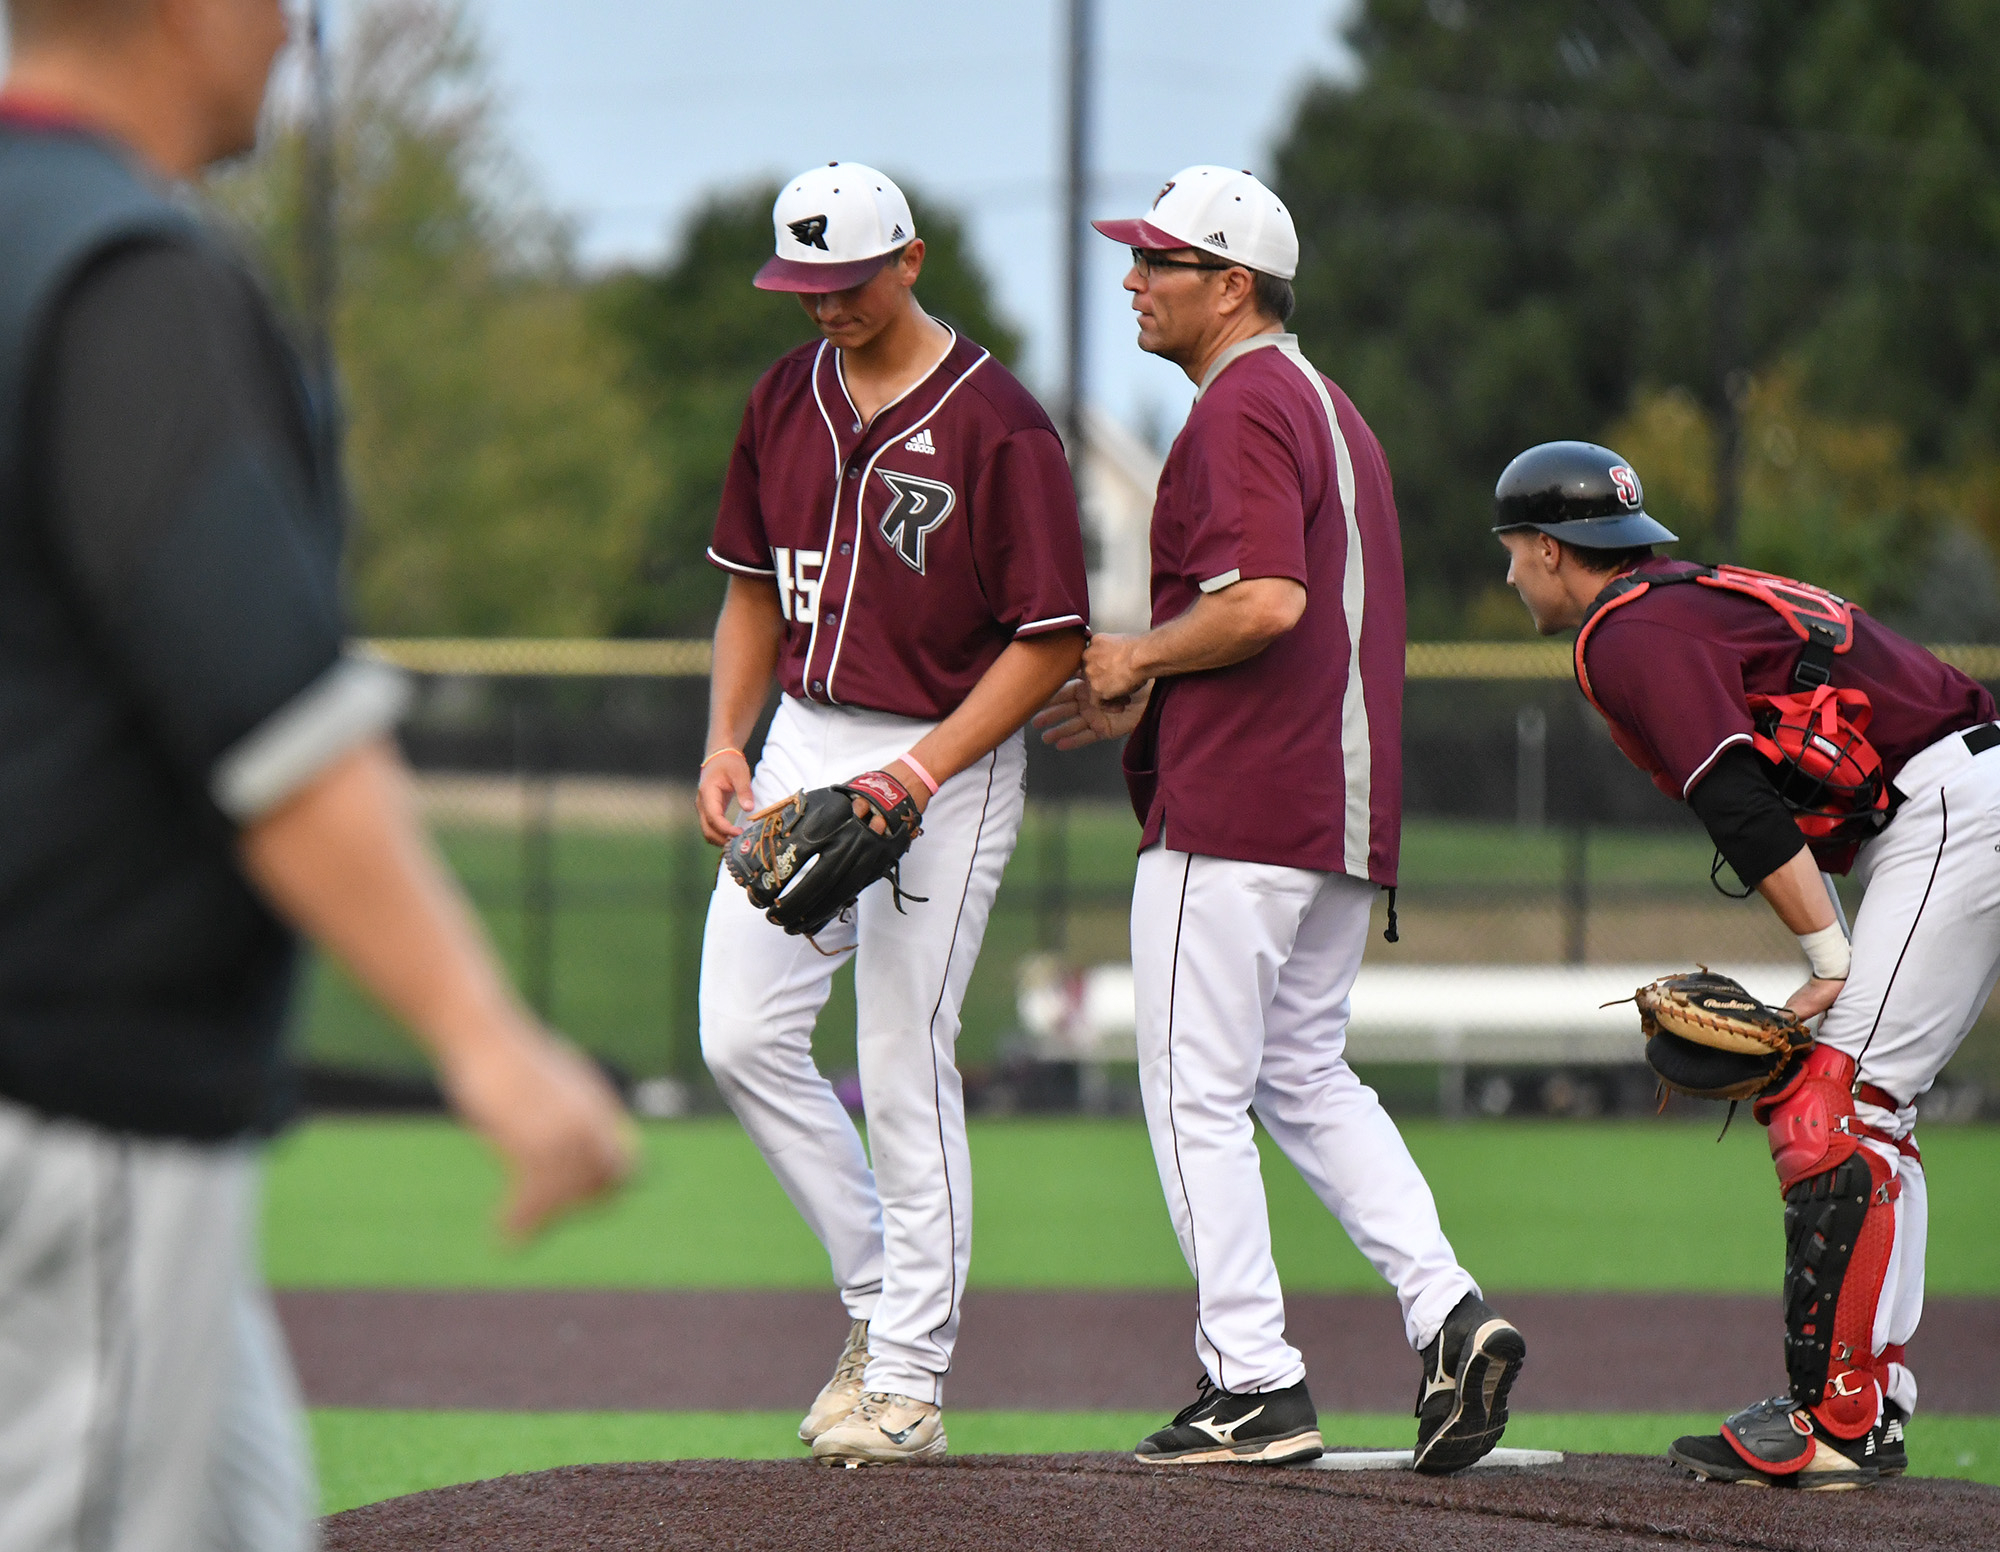 Ridgefield pitcher Brock Gillis, left, walks back to the dugout after getting pulled Saturday, Aug. 14, 2021, during the Raptors' 13-6 loss to Corvallis in a playoff game at the Ridgefield Outdoor Recreation Complex.